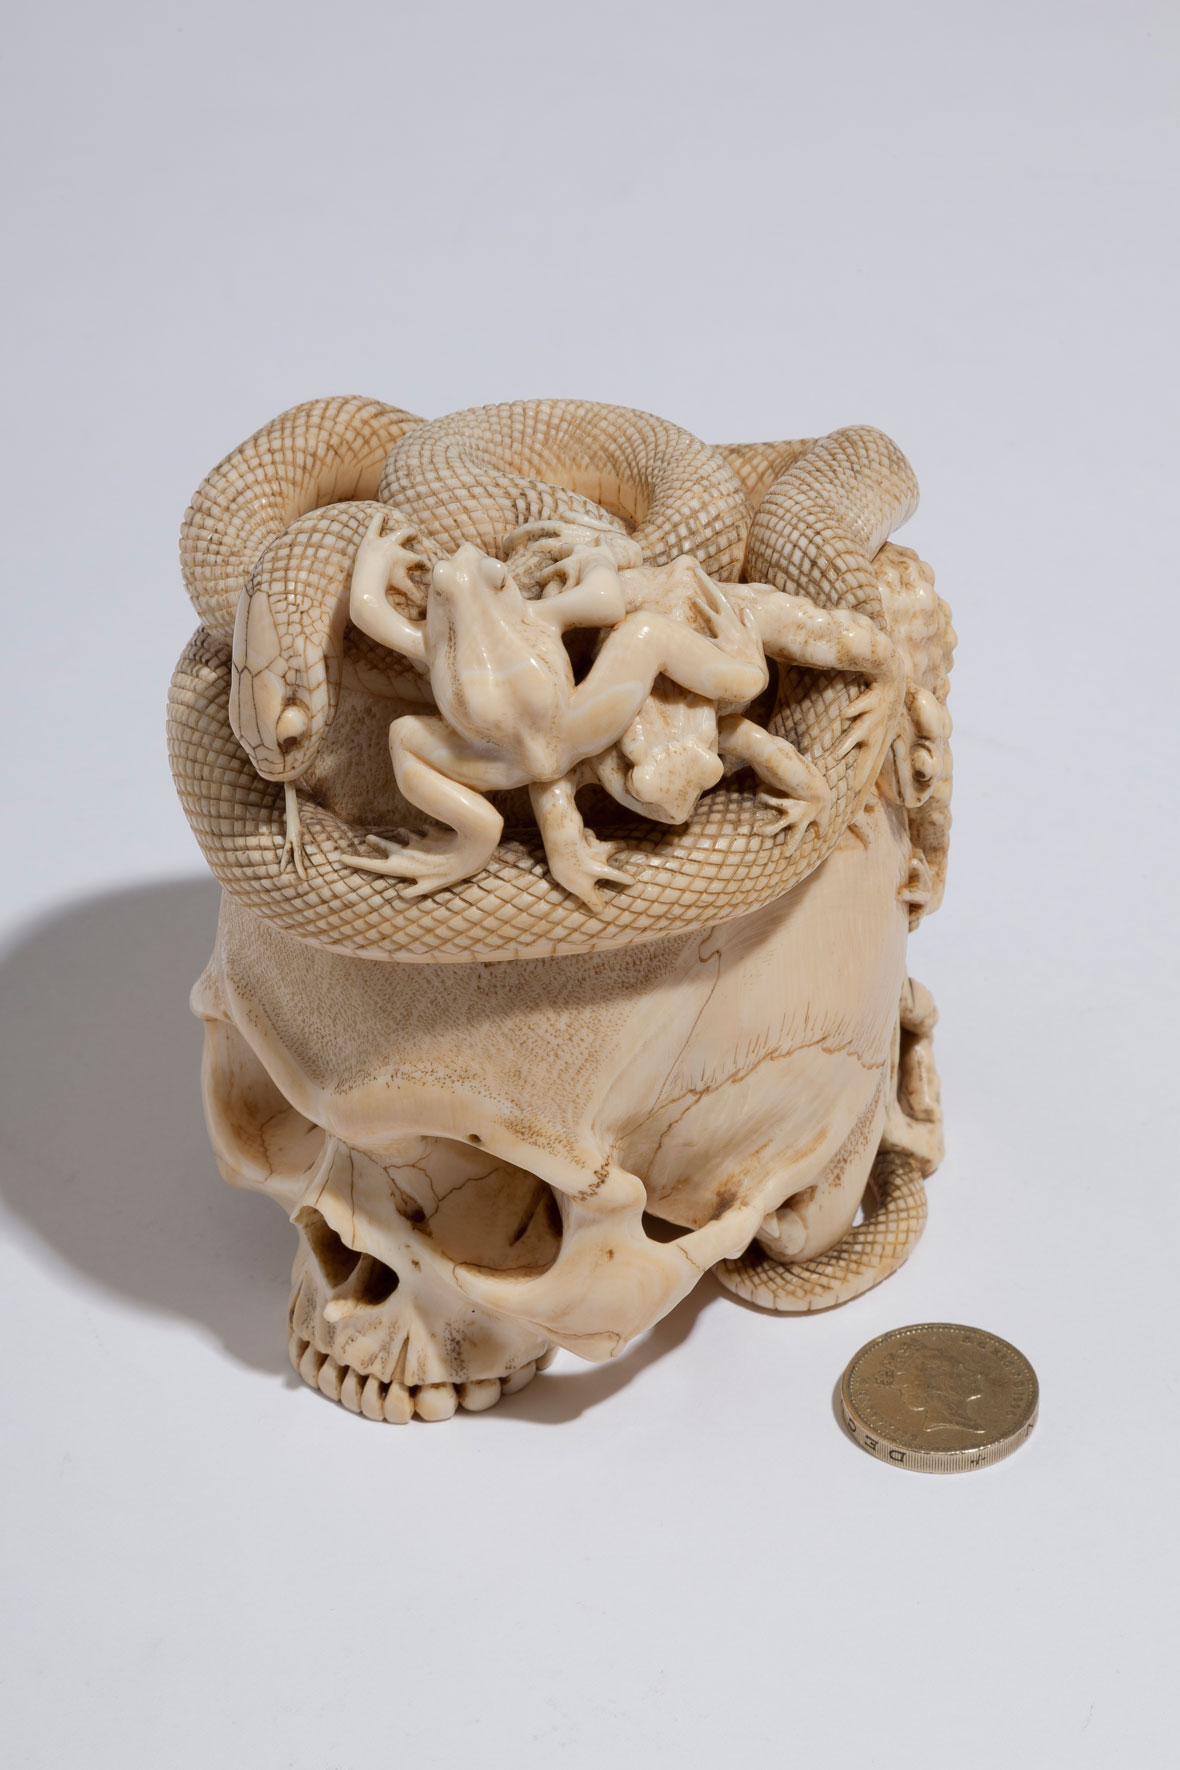 Japanese Ivory Skull with Coiled Snake and Toads